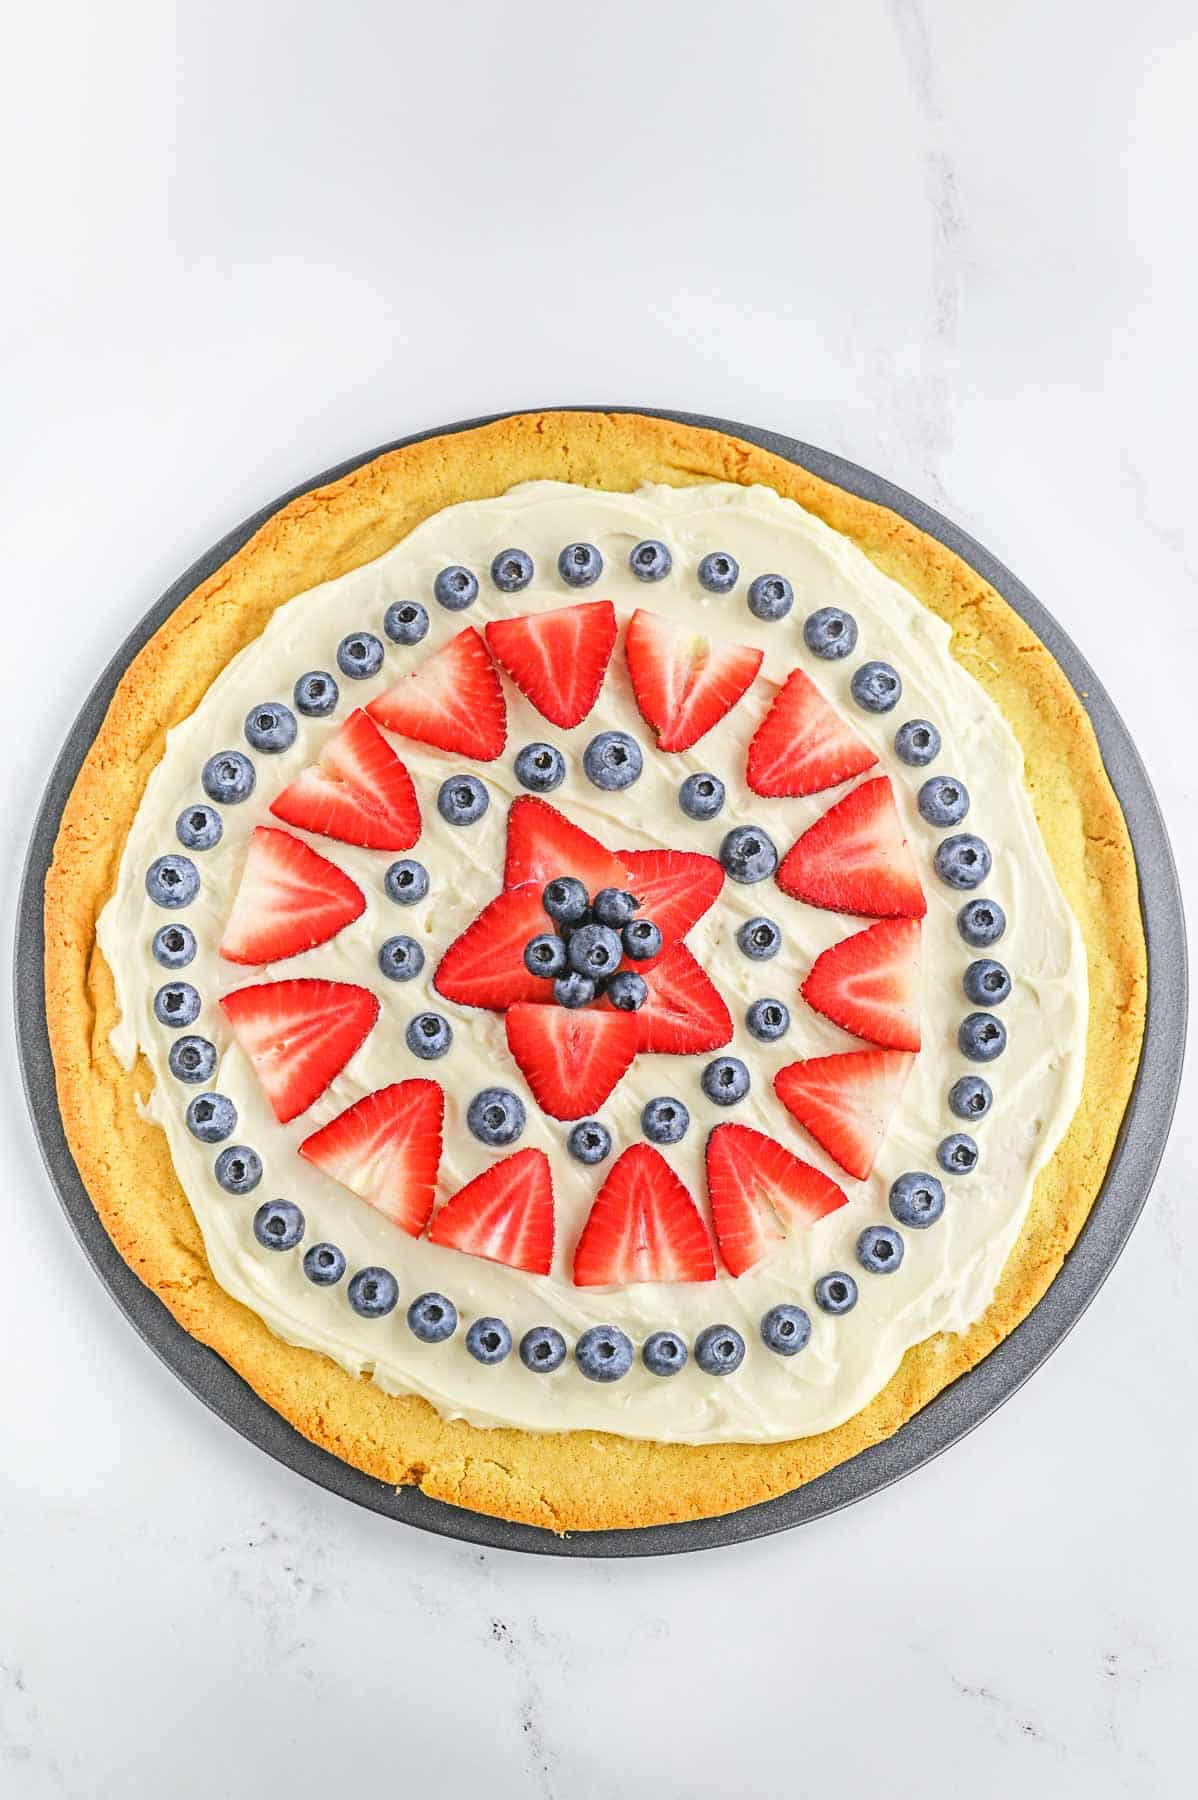 Decorated pizza with strawberries and blueberries.